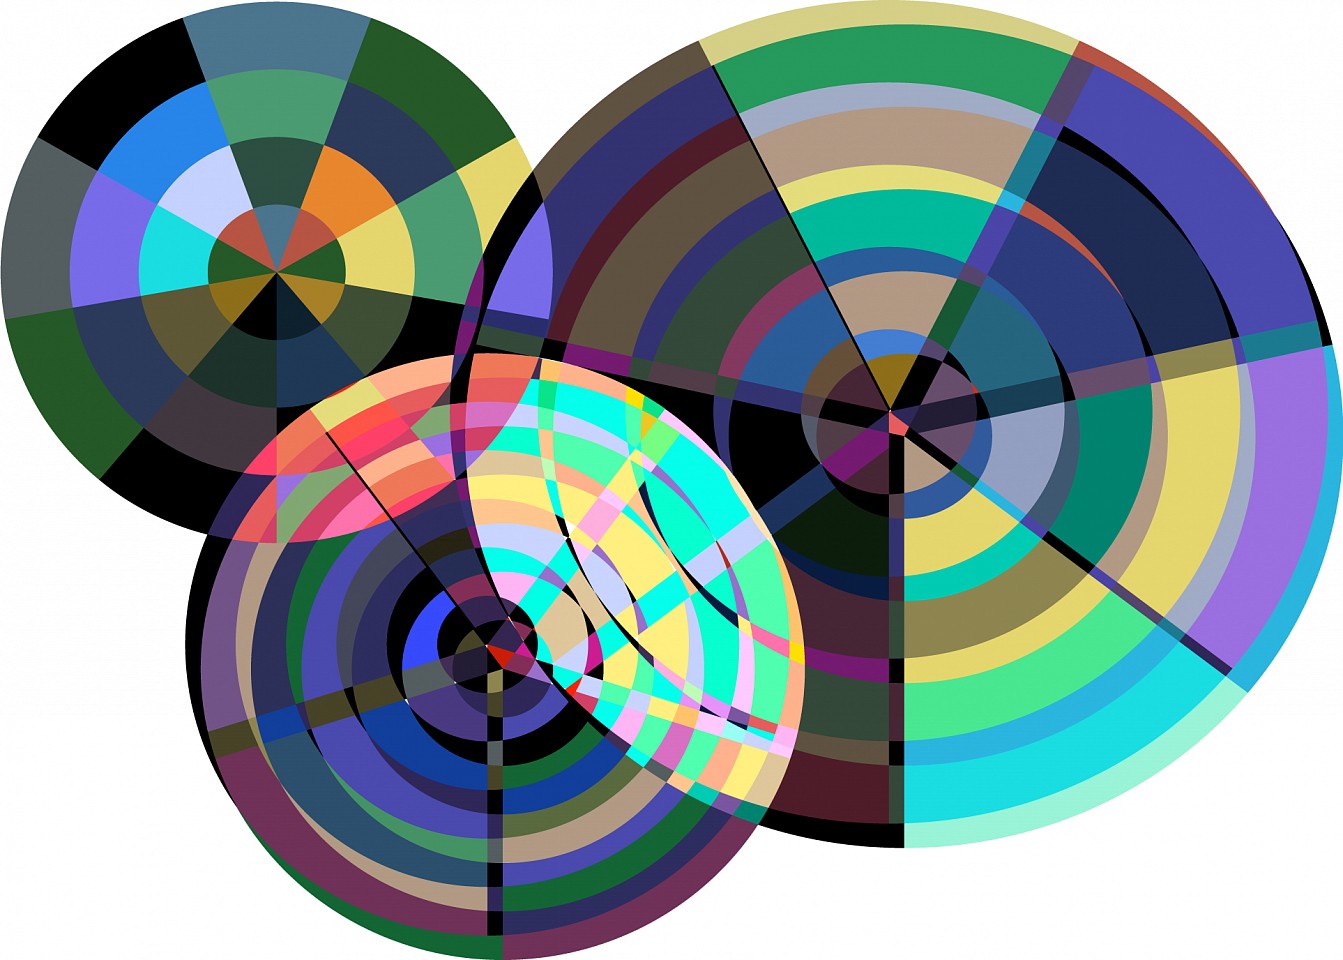 Dane Albert, Circles #23, 2023
Acrylic on canvas (Concept), 48 x 72 in. (121.9 x 182.9 cm)
Series of colored lines and shapes in multiple configurations
DA.2023-023